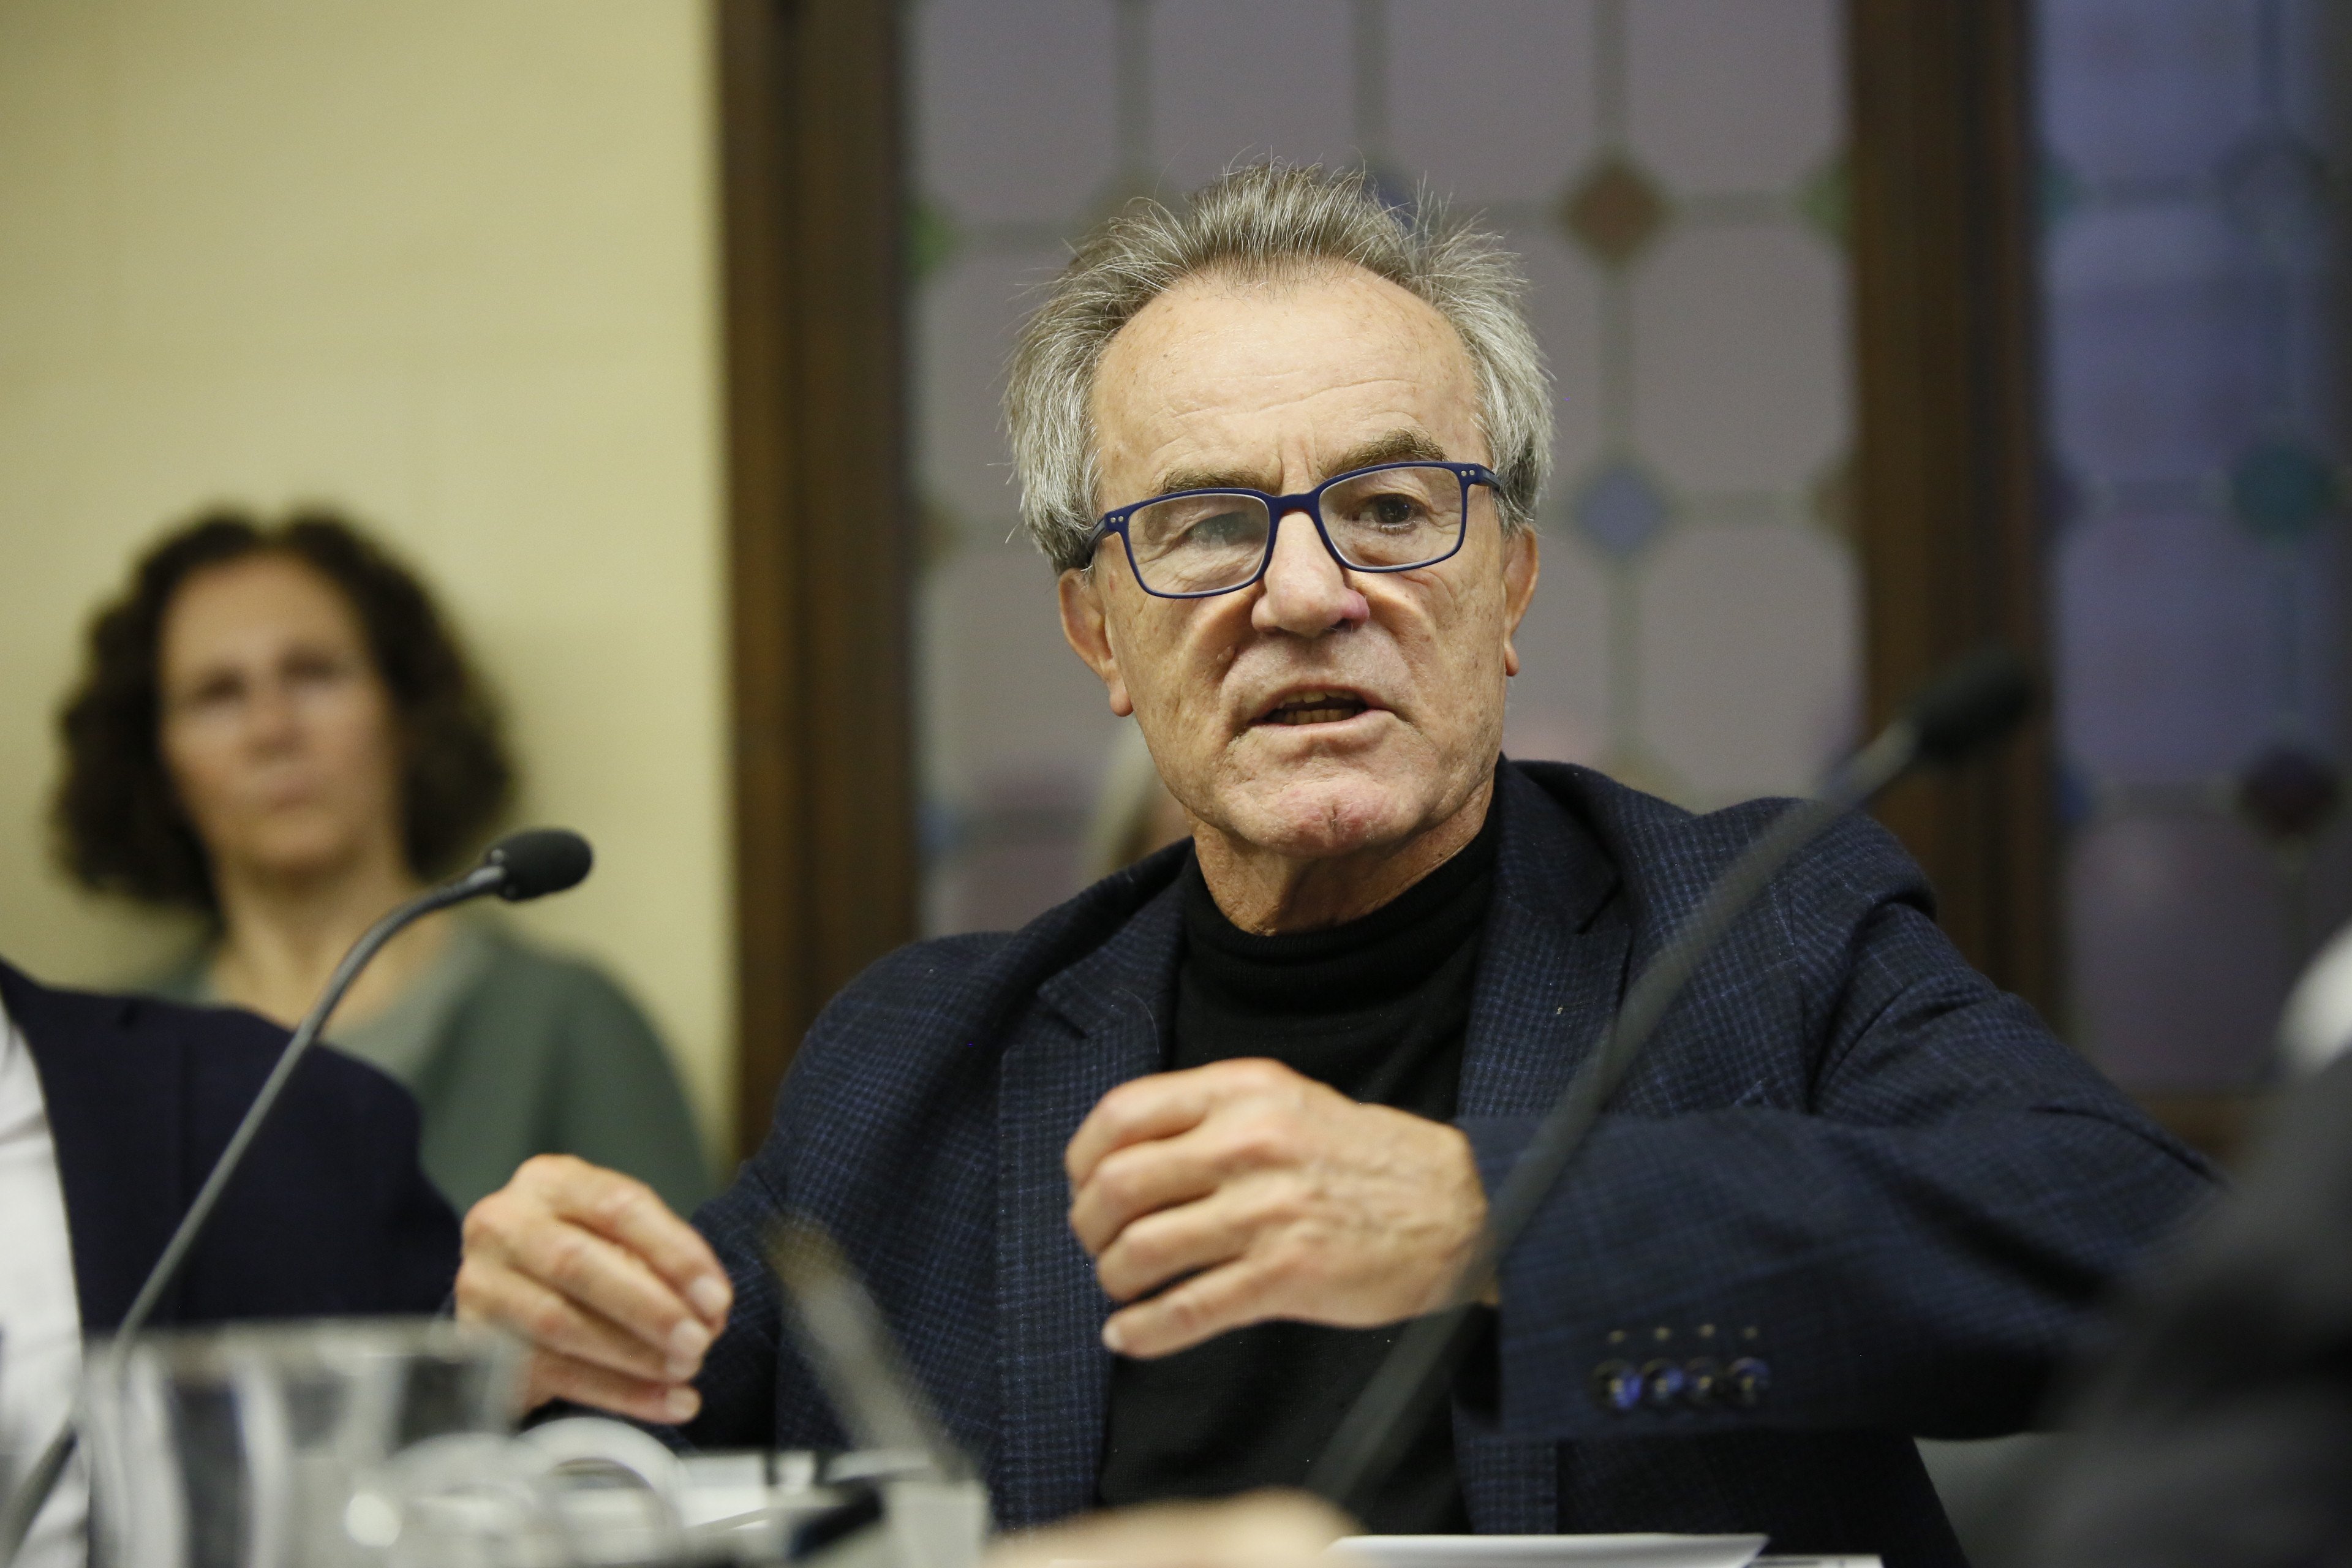 Constitutional lawyer Pérez Royo: "The Spanish government has lost control"